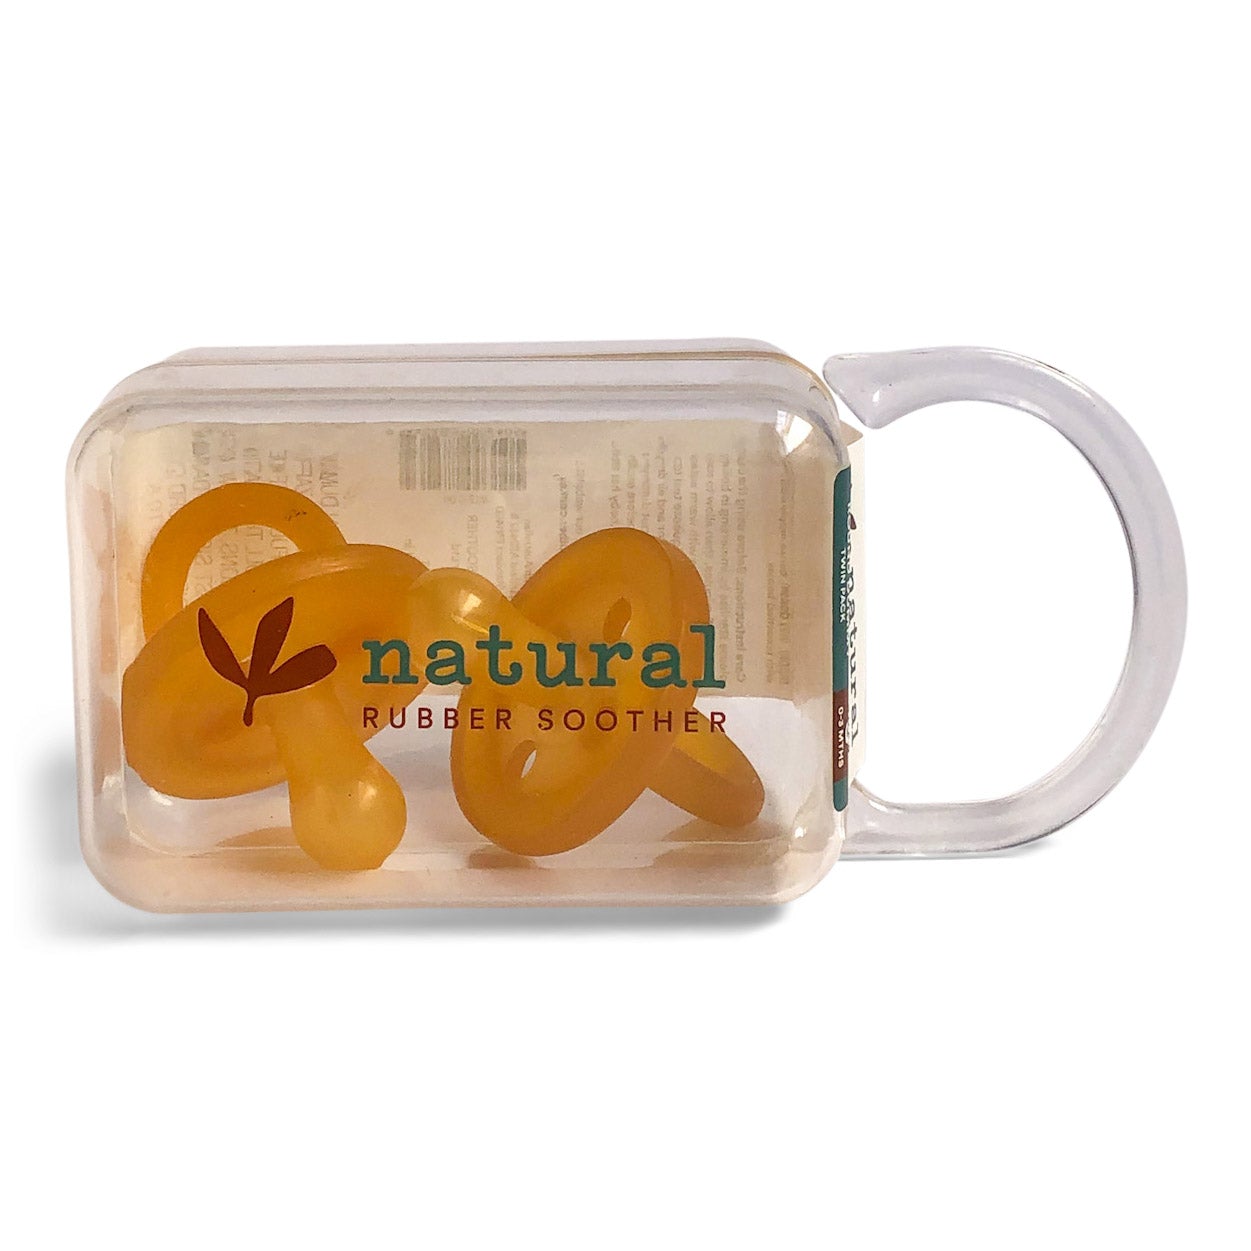 Natural Rubber Soother - Round Medium Twin Pack